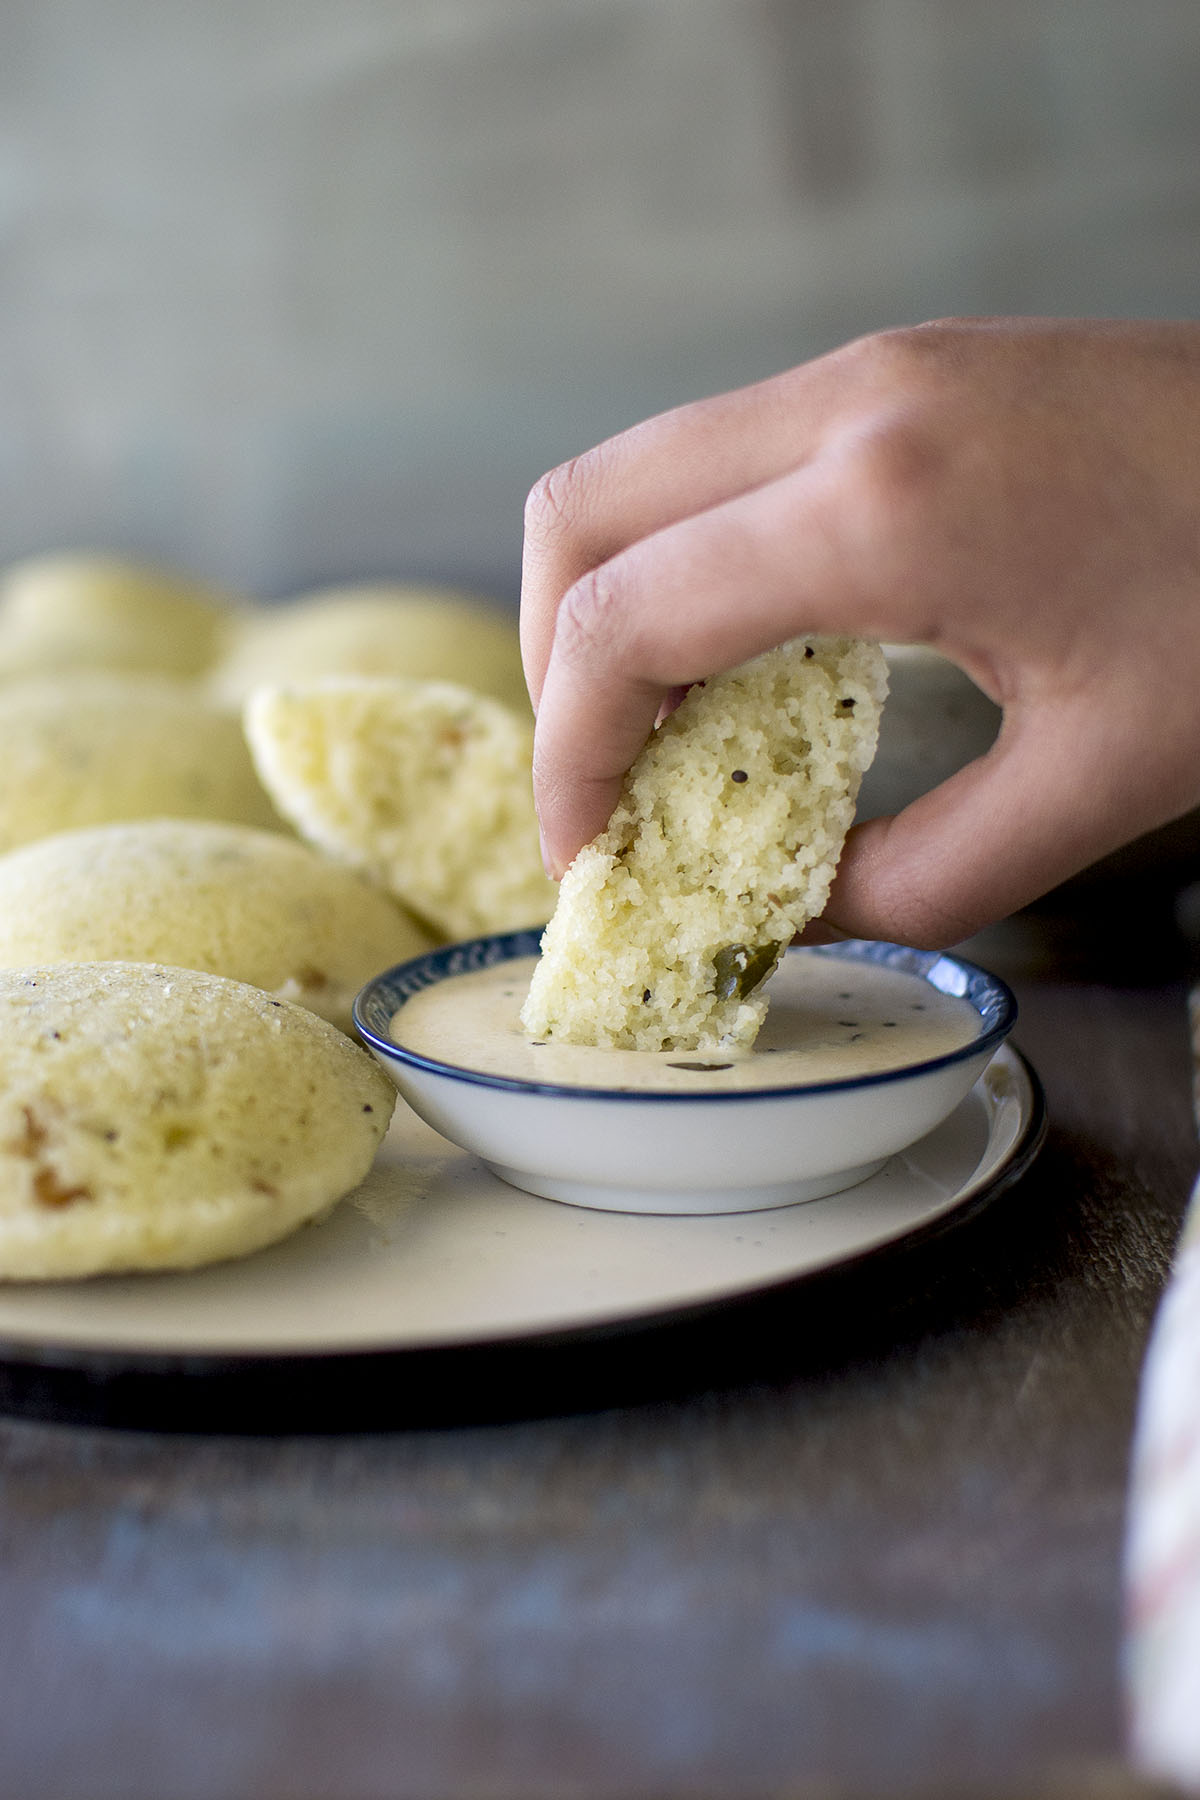 Hand dipping steamed bread in chutney